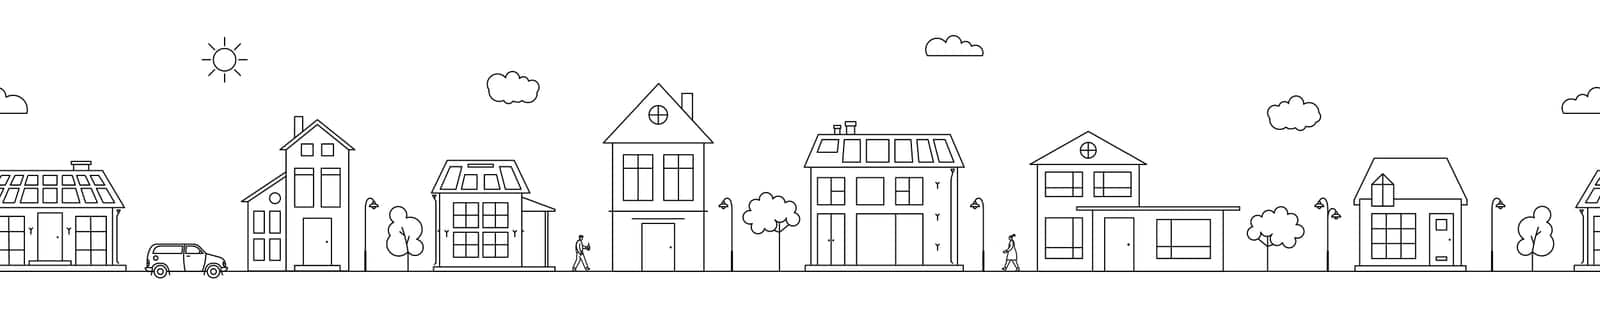 Seamless web banner with Neighborhood line art vector illustration. Cityscape with monochrome residential buildings and solar panels on roofs